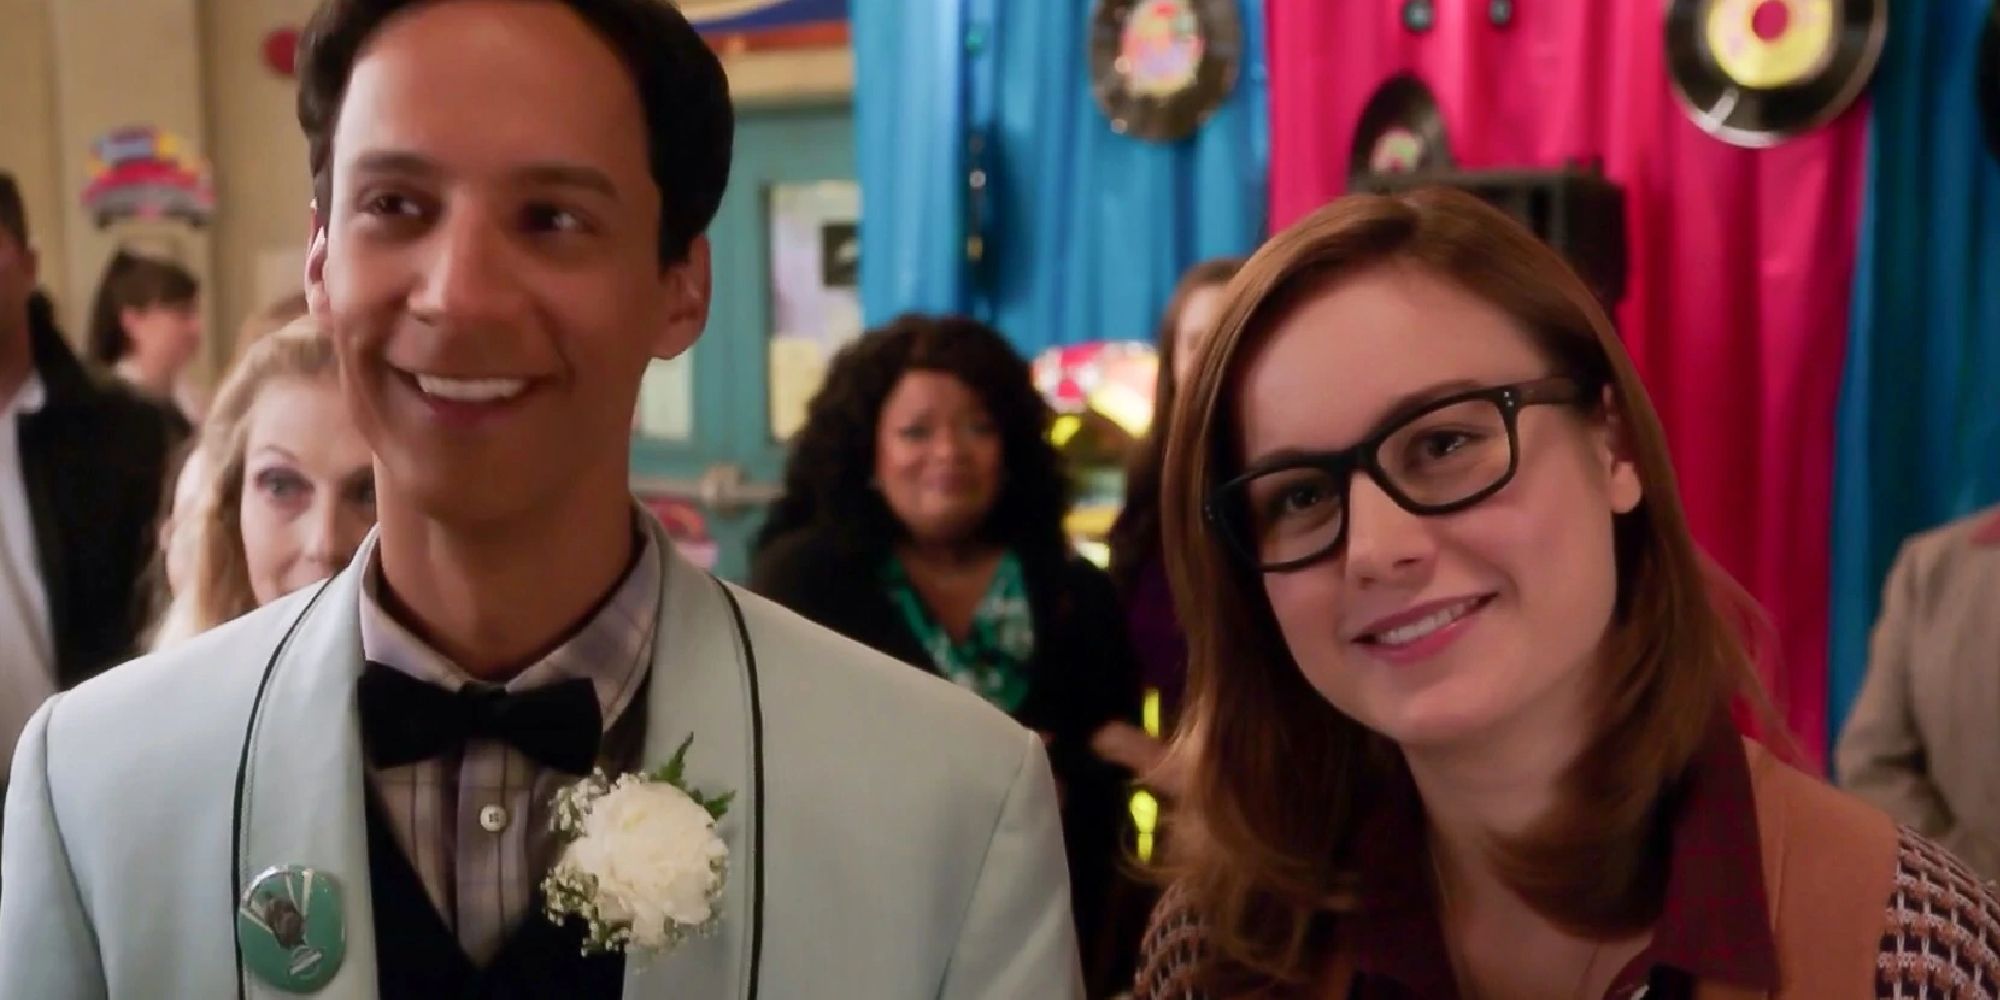 Abed at a dance with Rachel in season 4